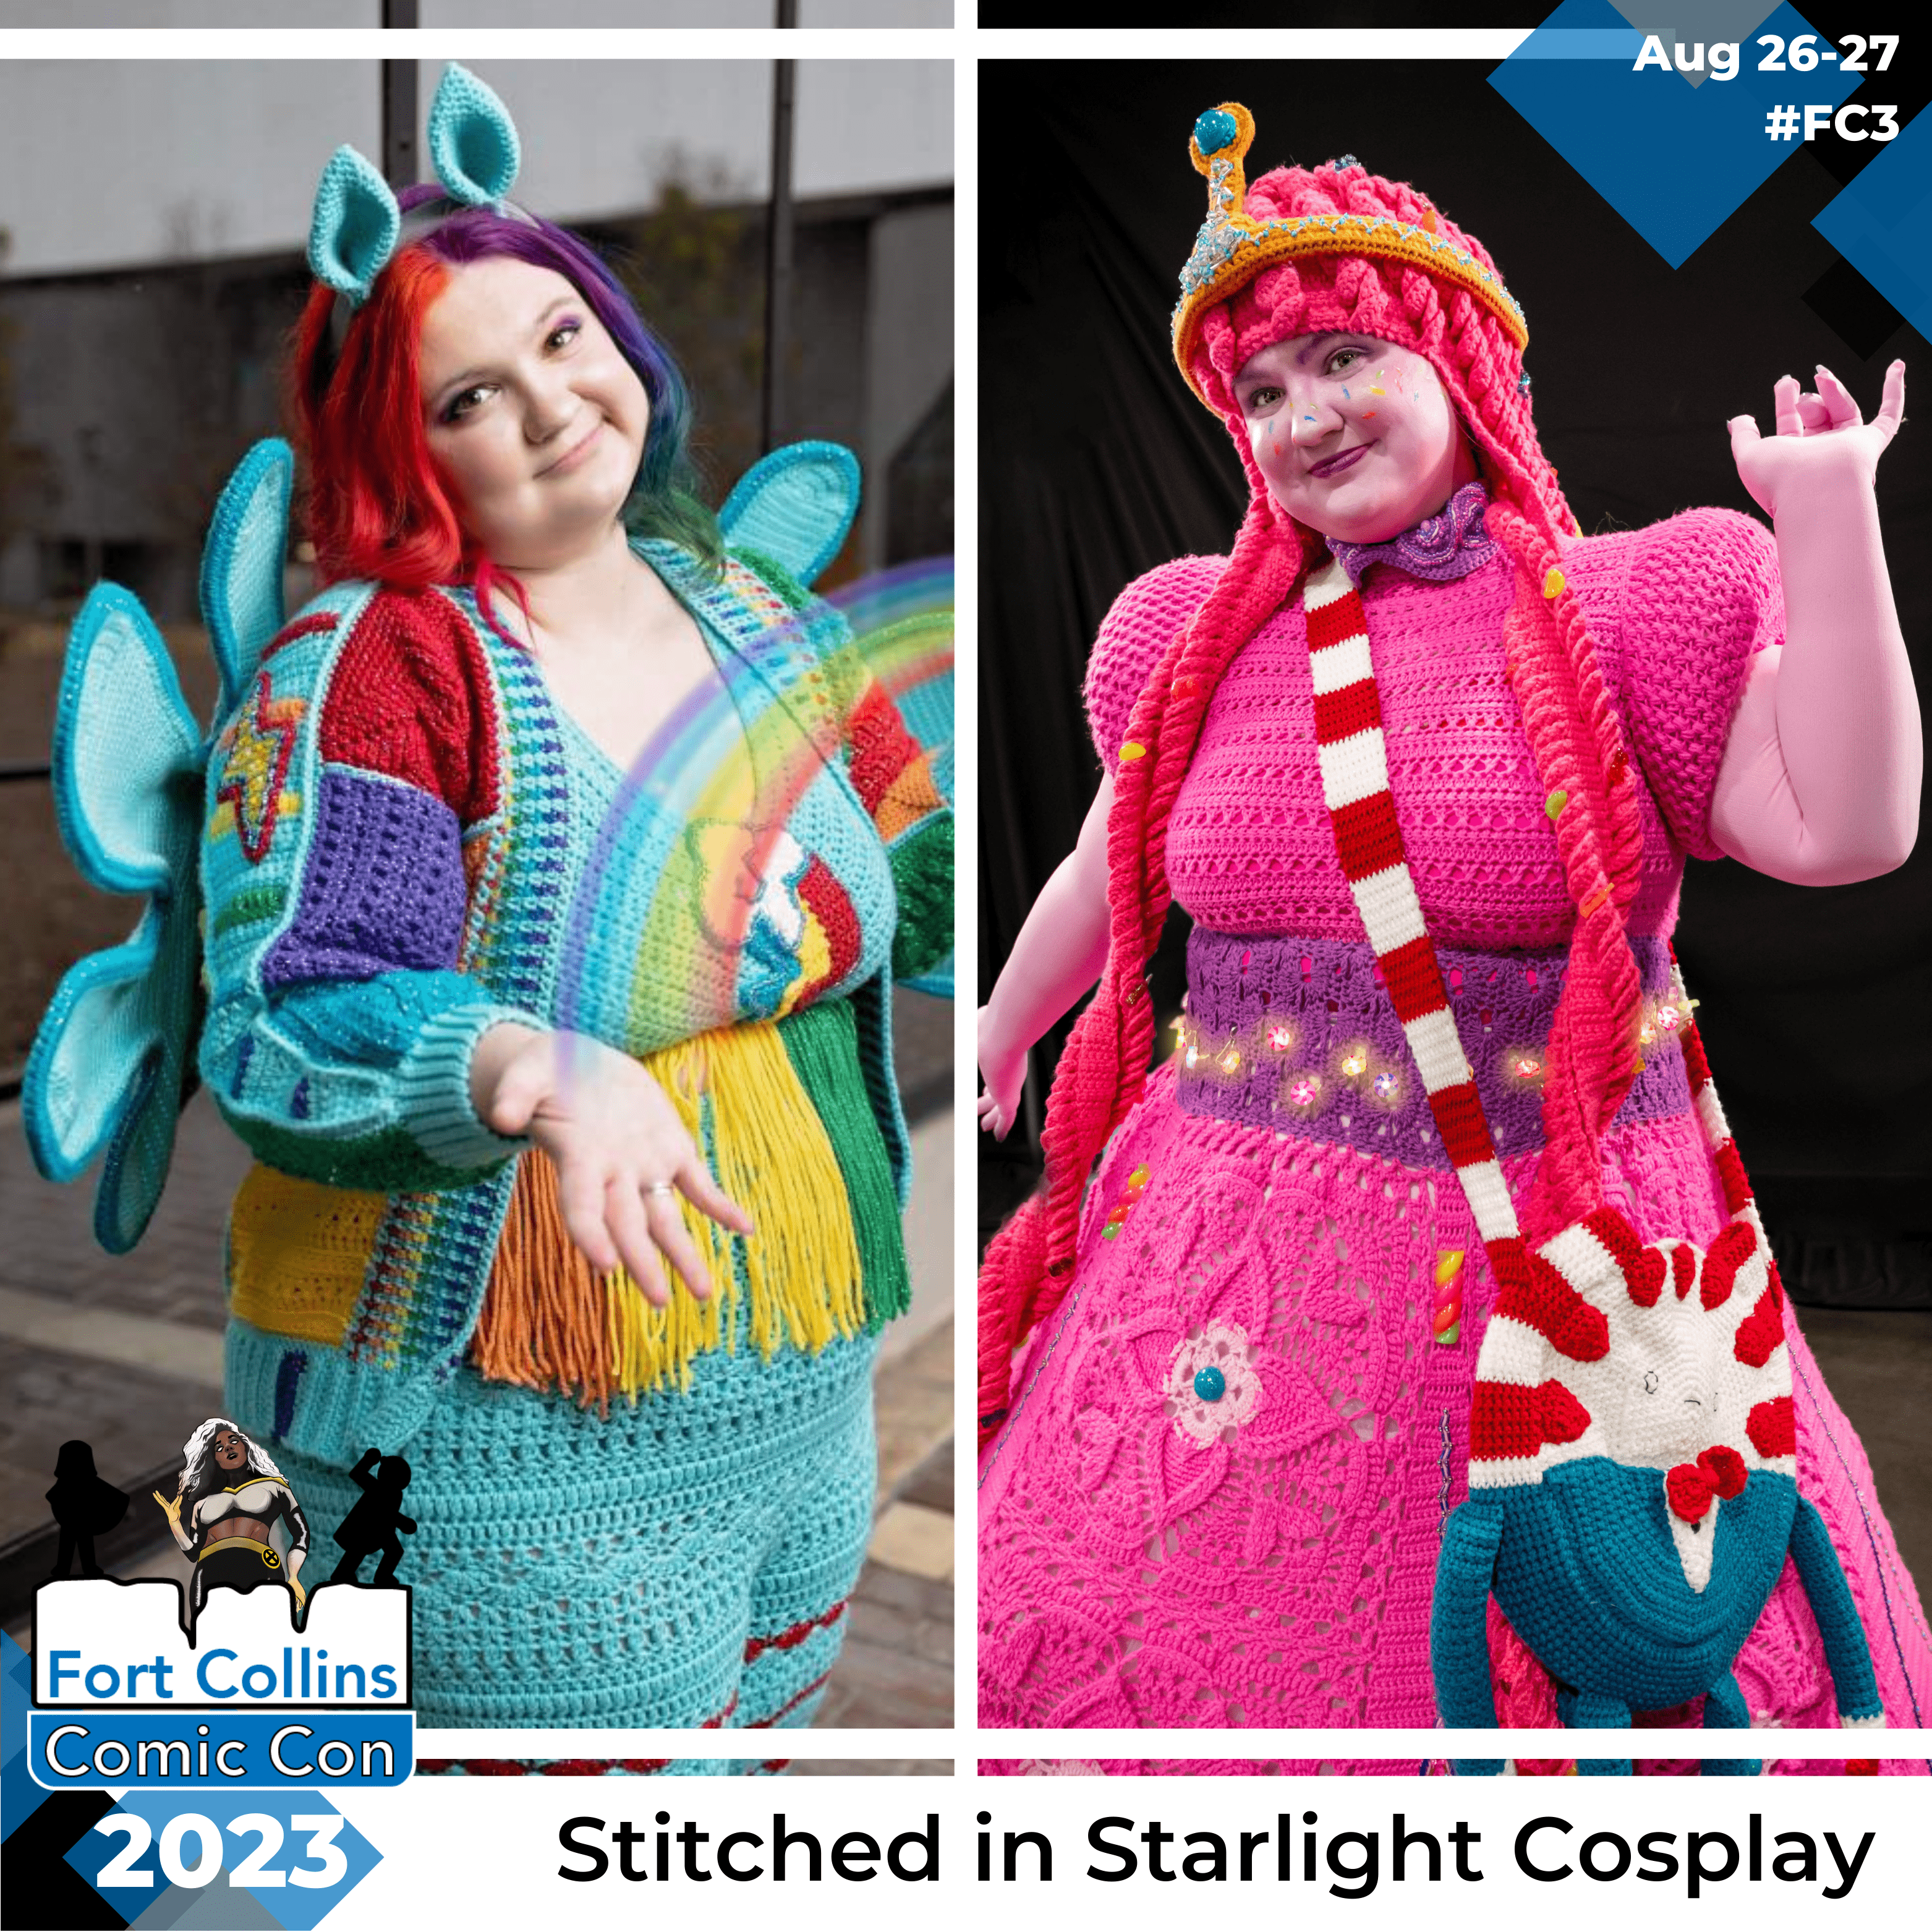 Stitched in Starlight Cosplay